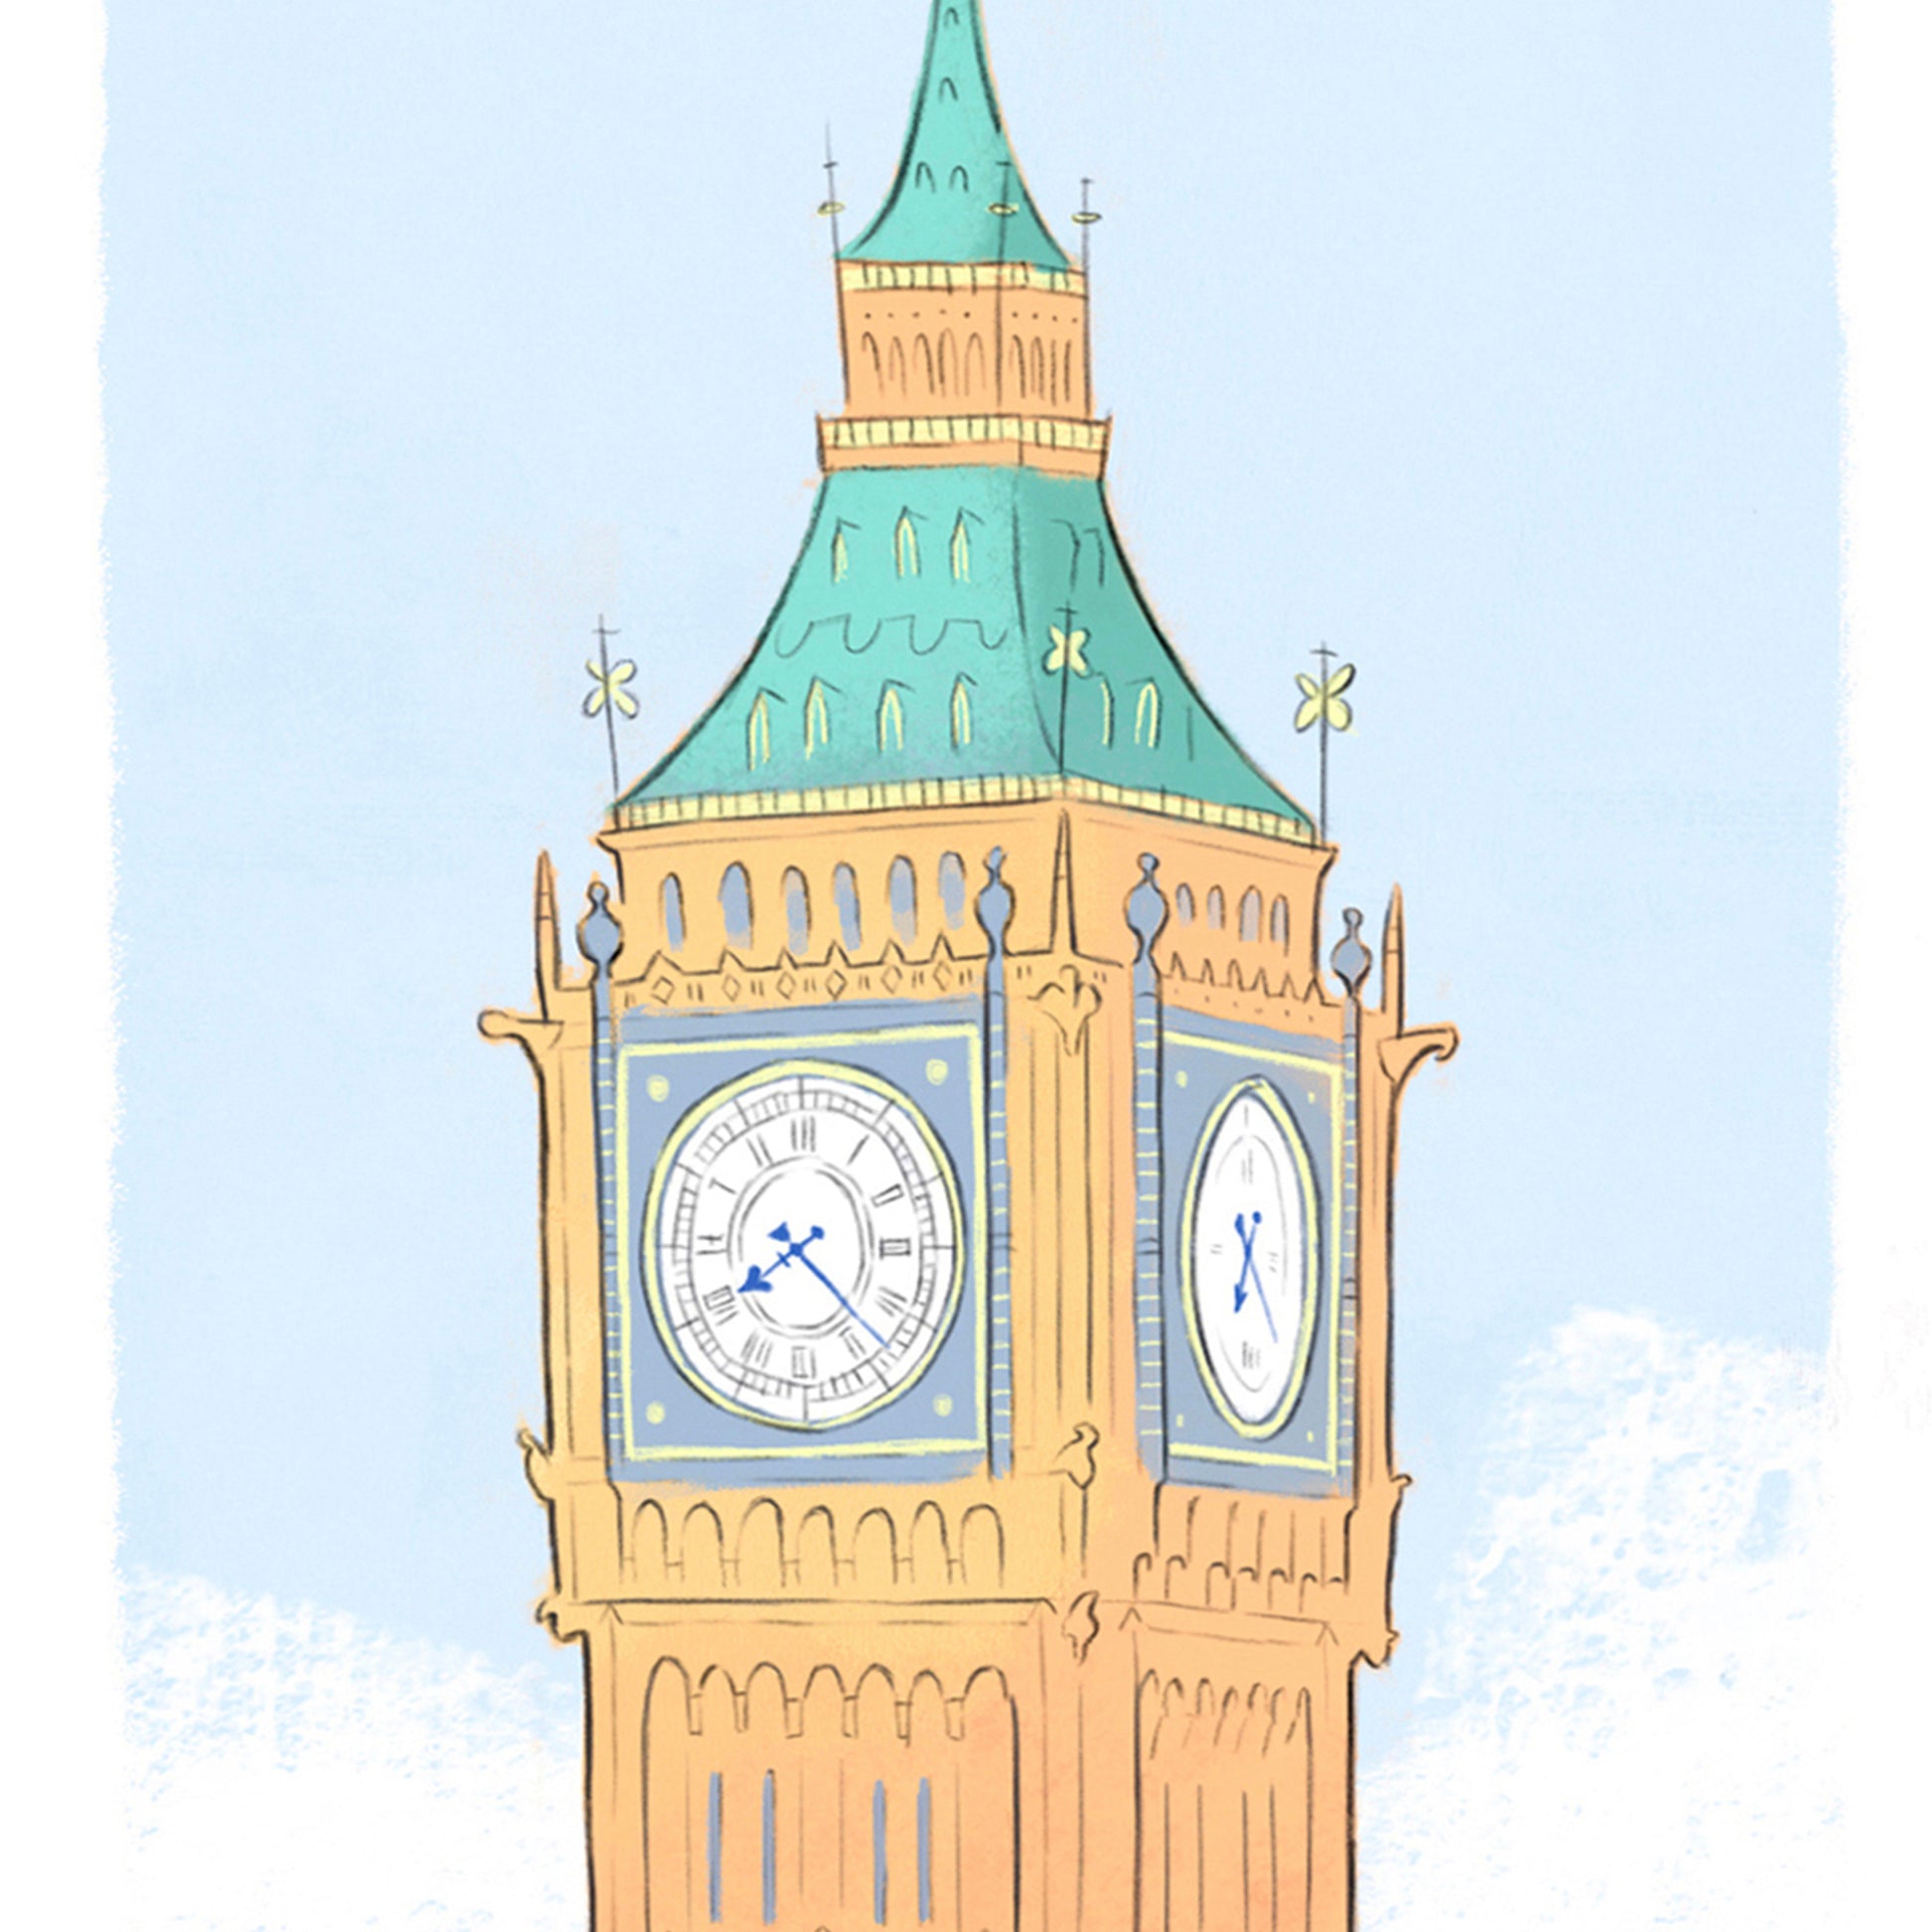 Detail from a print of London's Big Ben beautifully illustrated by Mike Green.